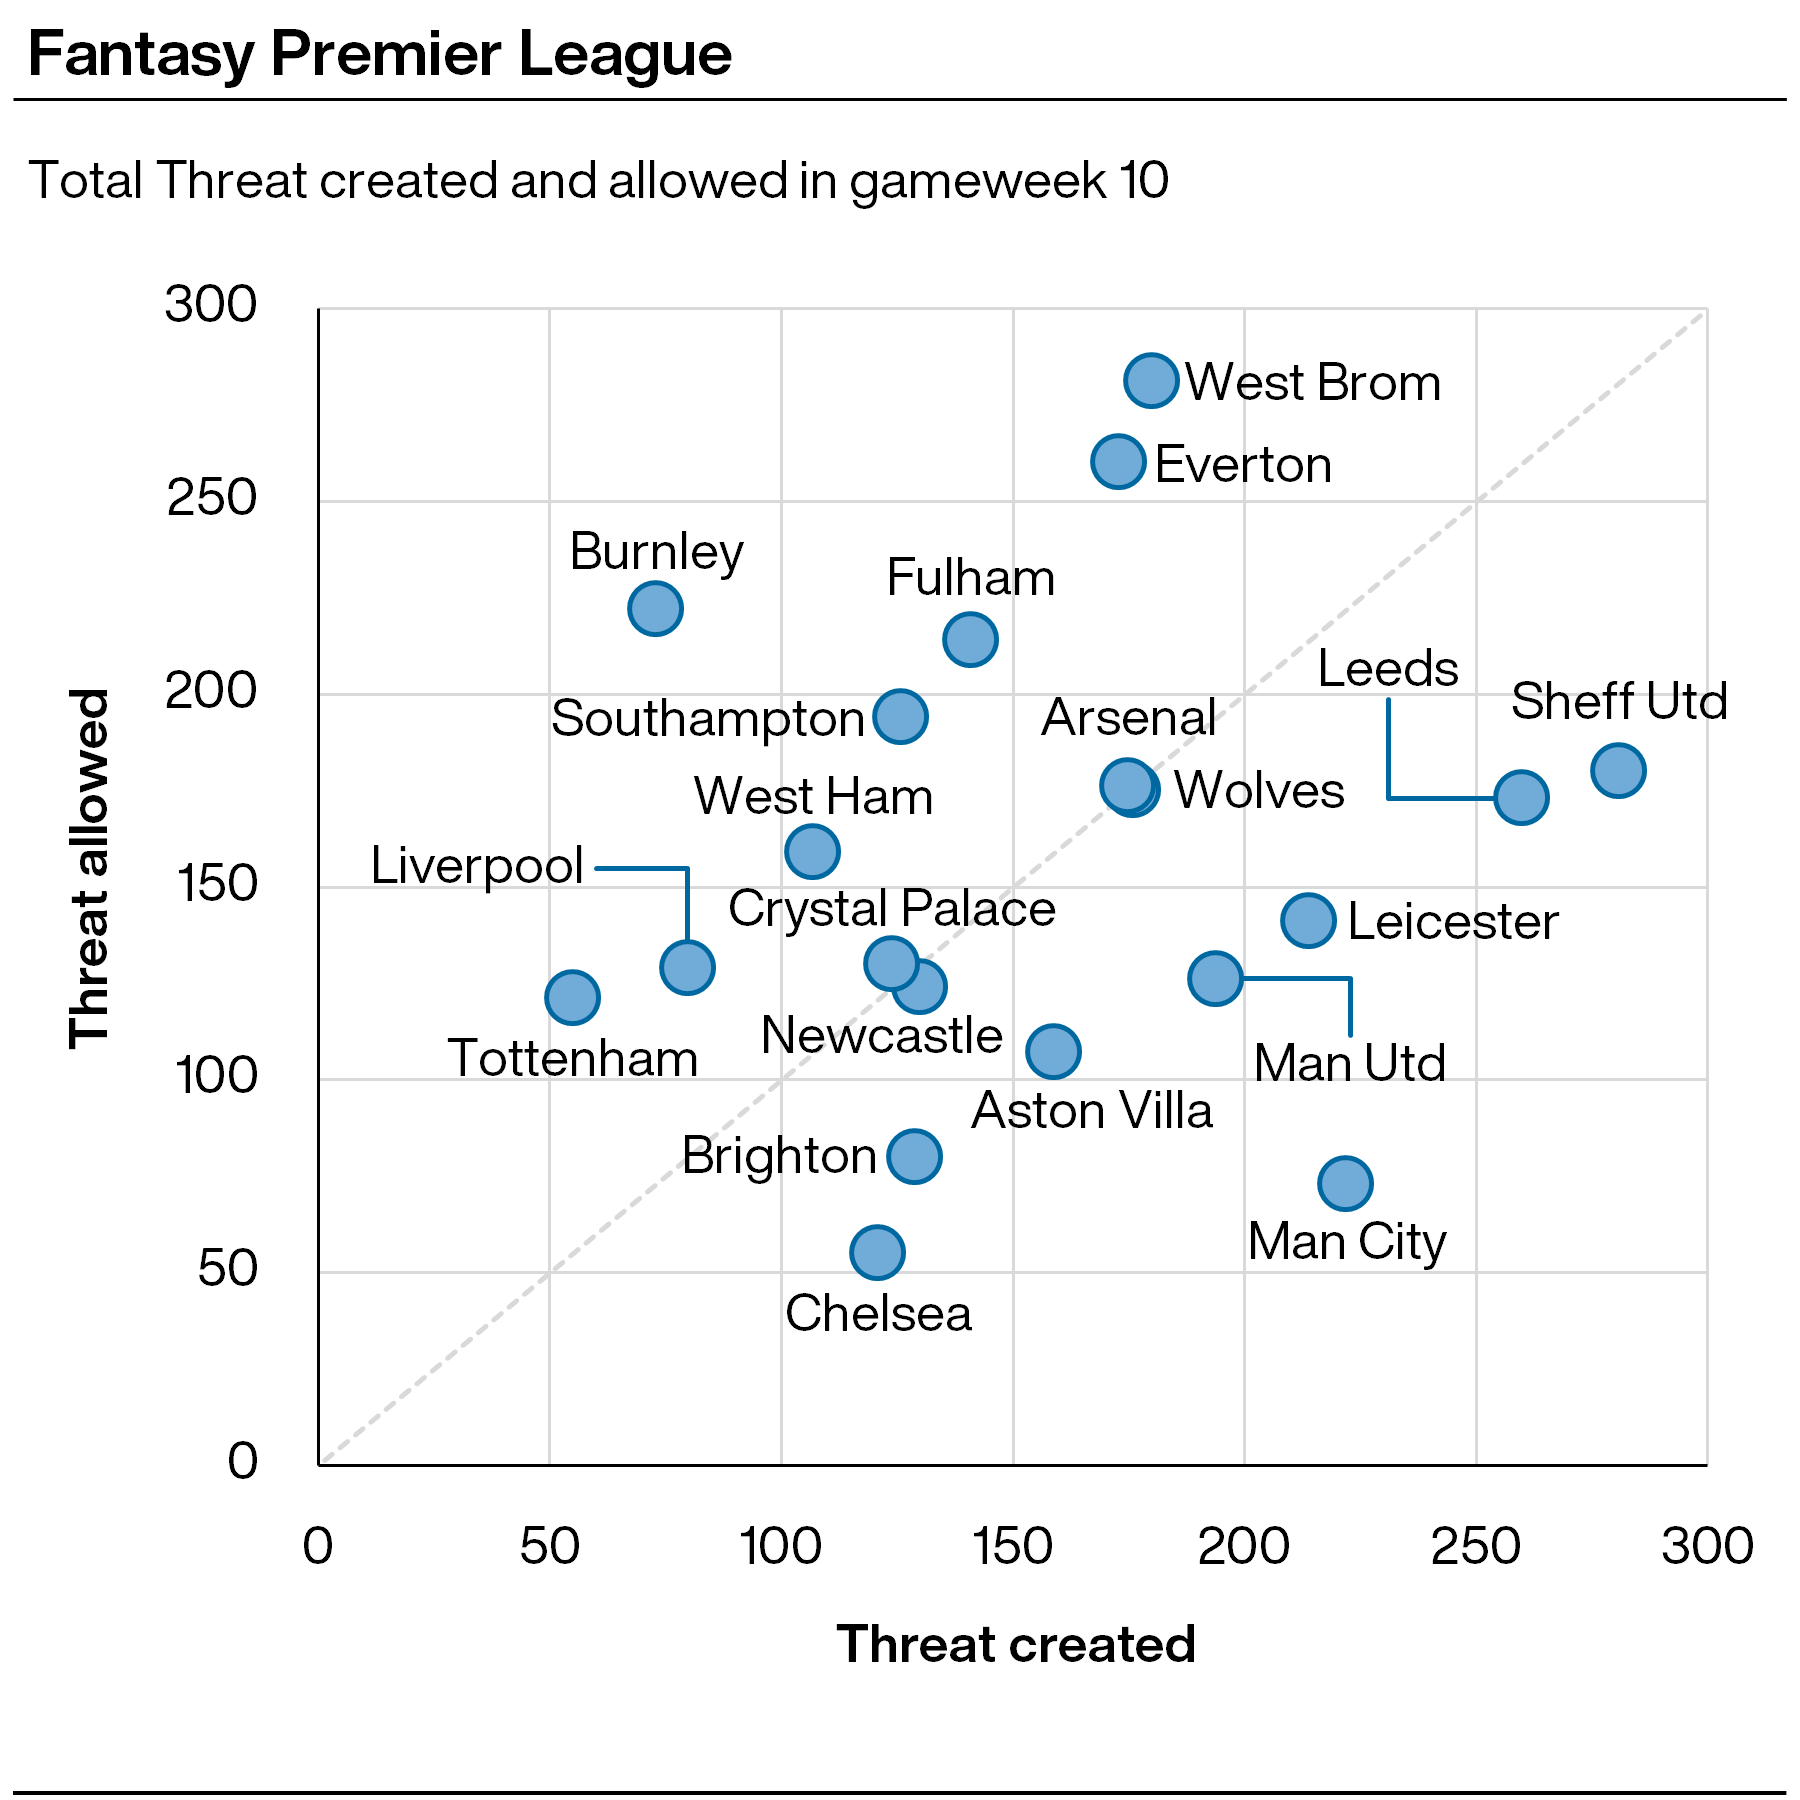 FPL gameweek 10: Threat created and allowed